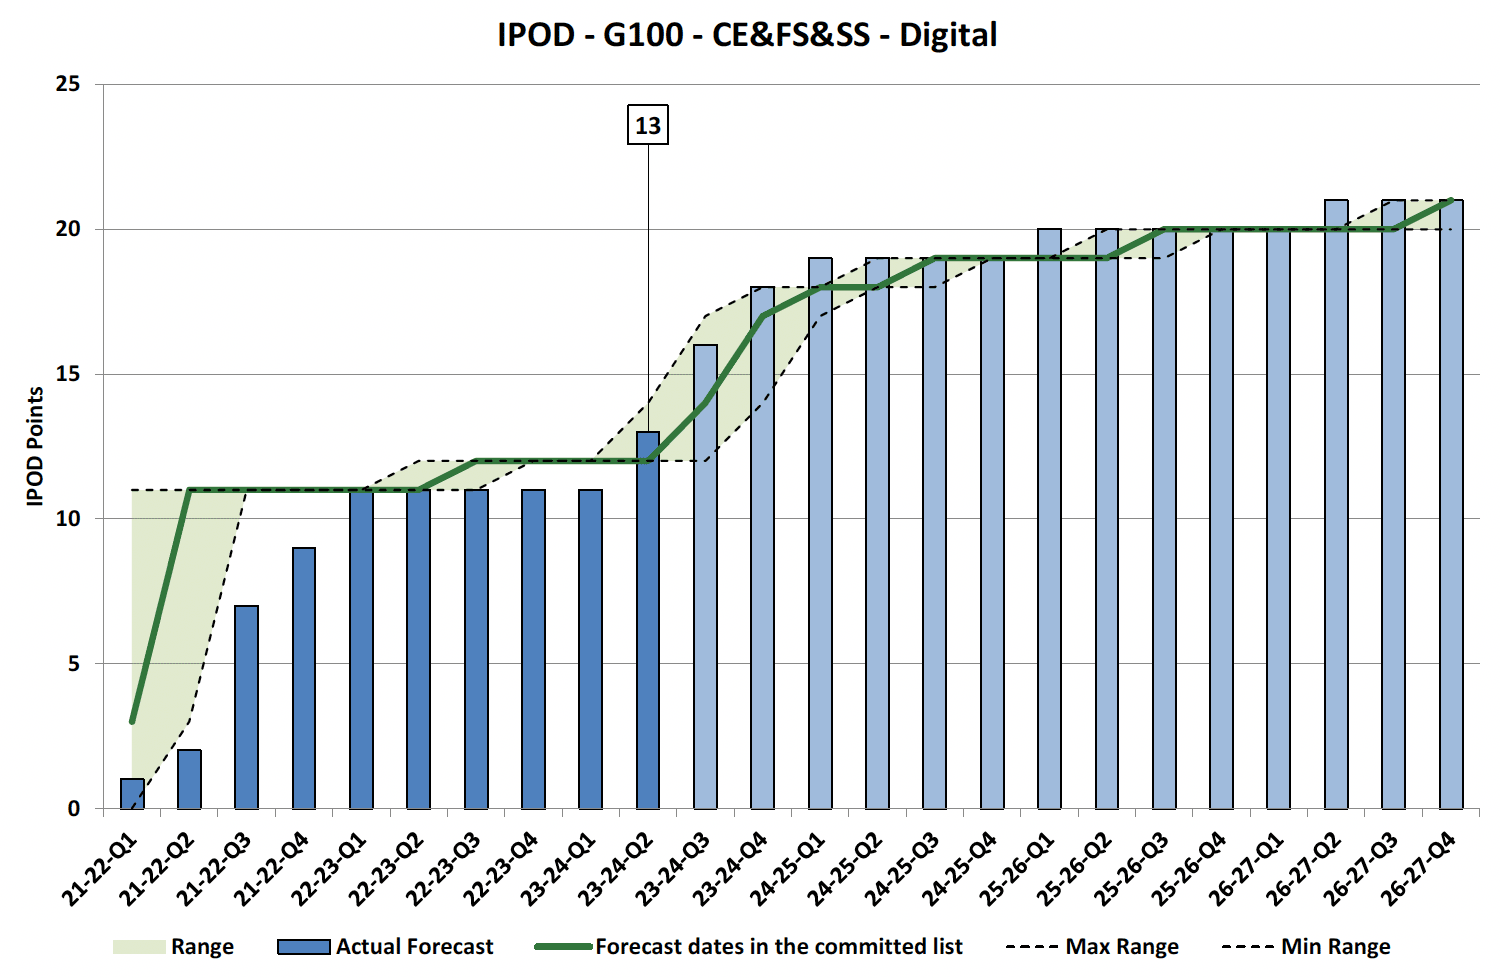 Chart showing IPOD points achieved or forecast for Project Acceptance milestone against target range for Digital Projects in CE&FS&SS Portfolio